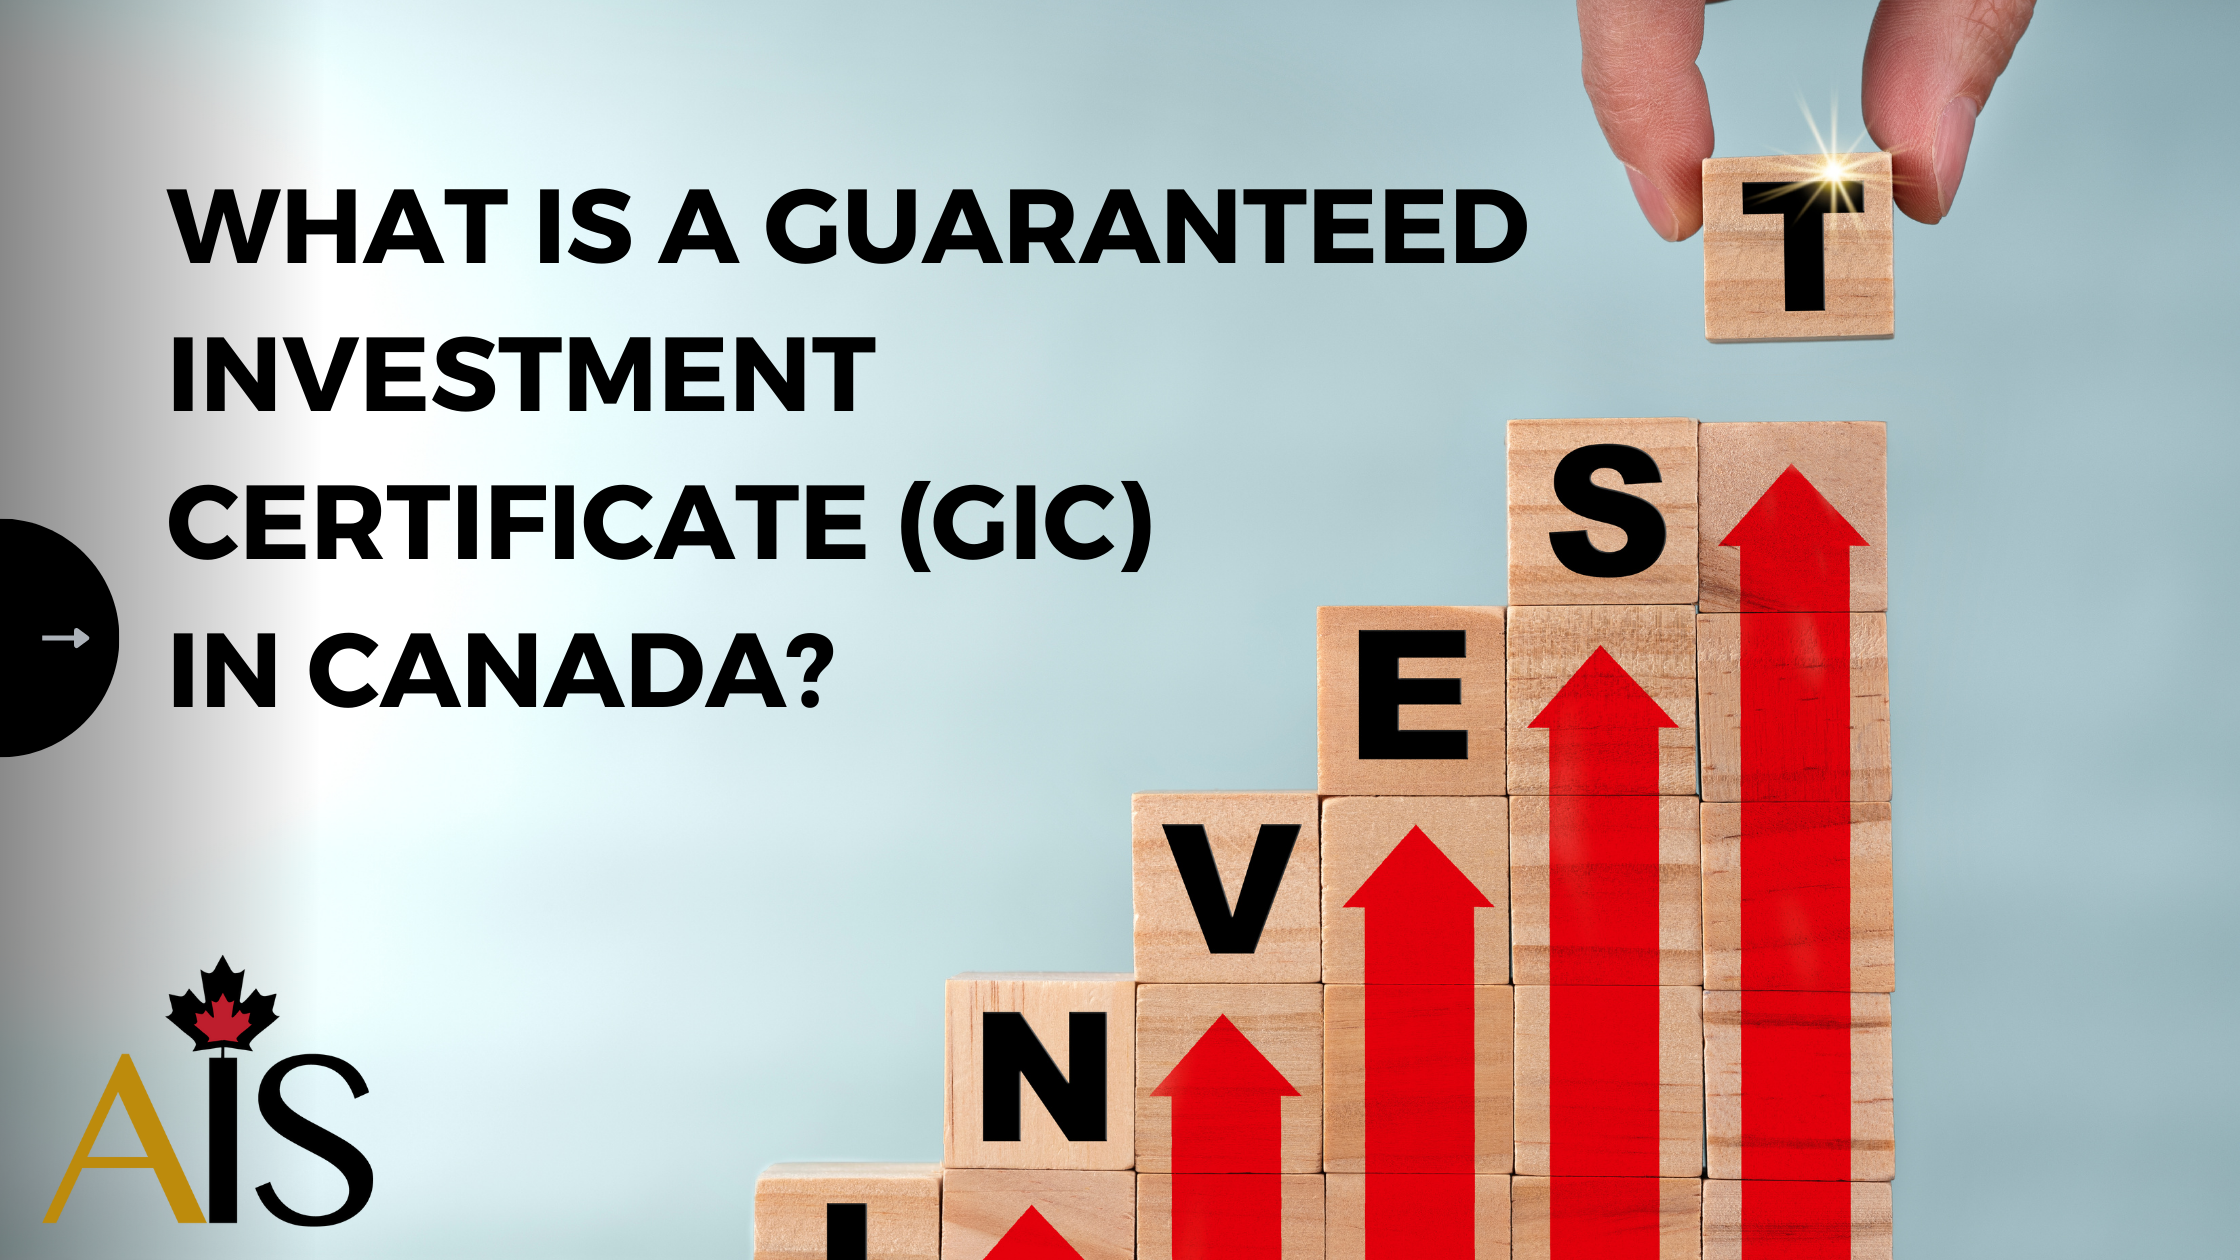 What is a Guaranteed Investment Certificate (GIC) in Canada?